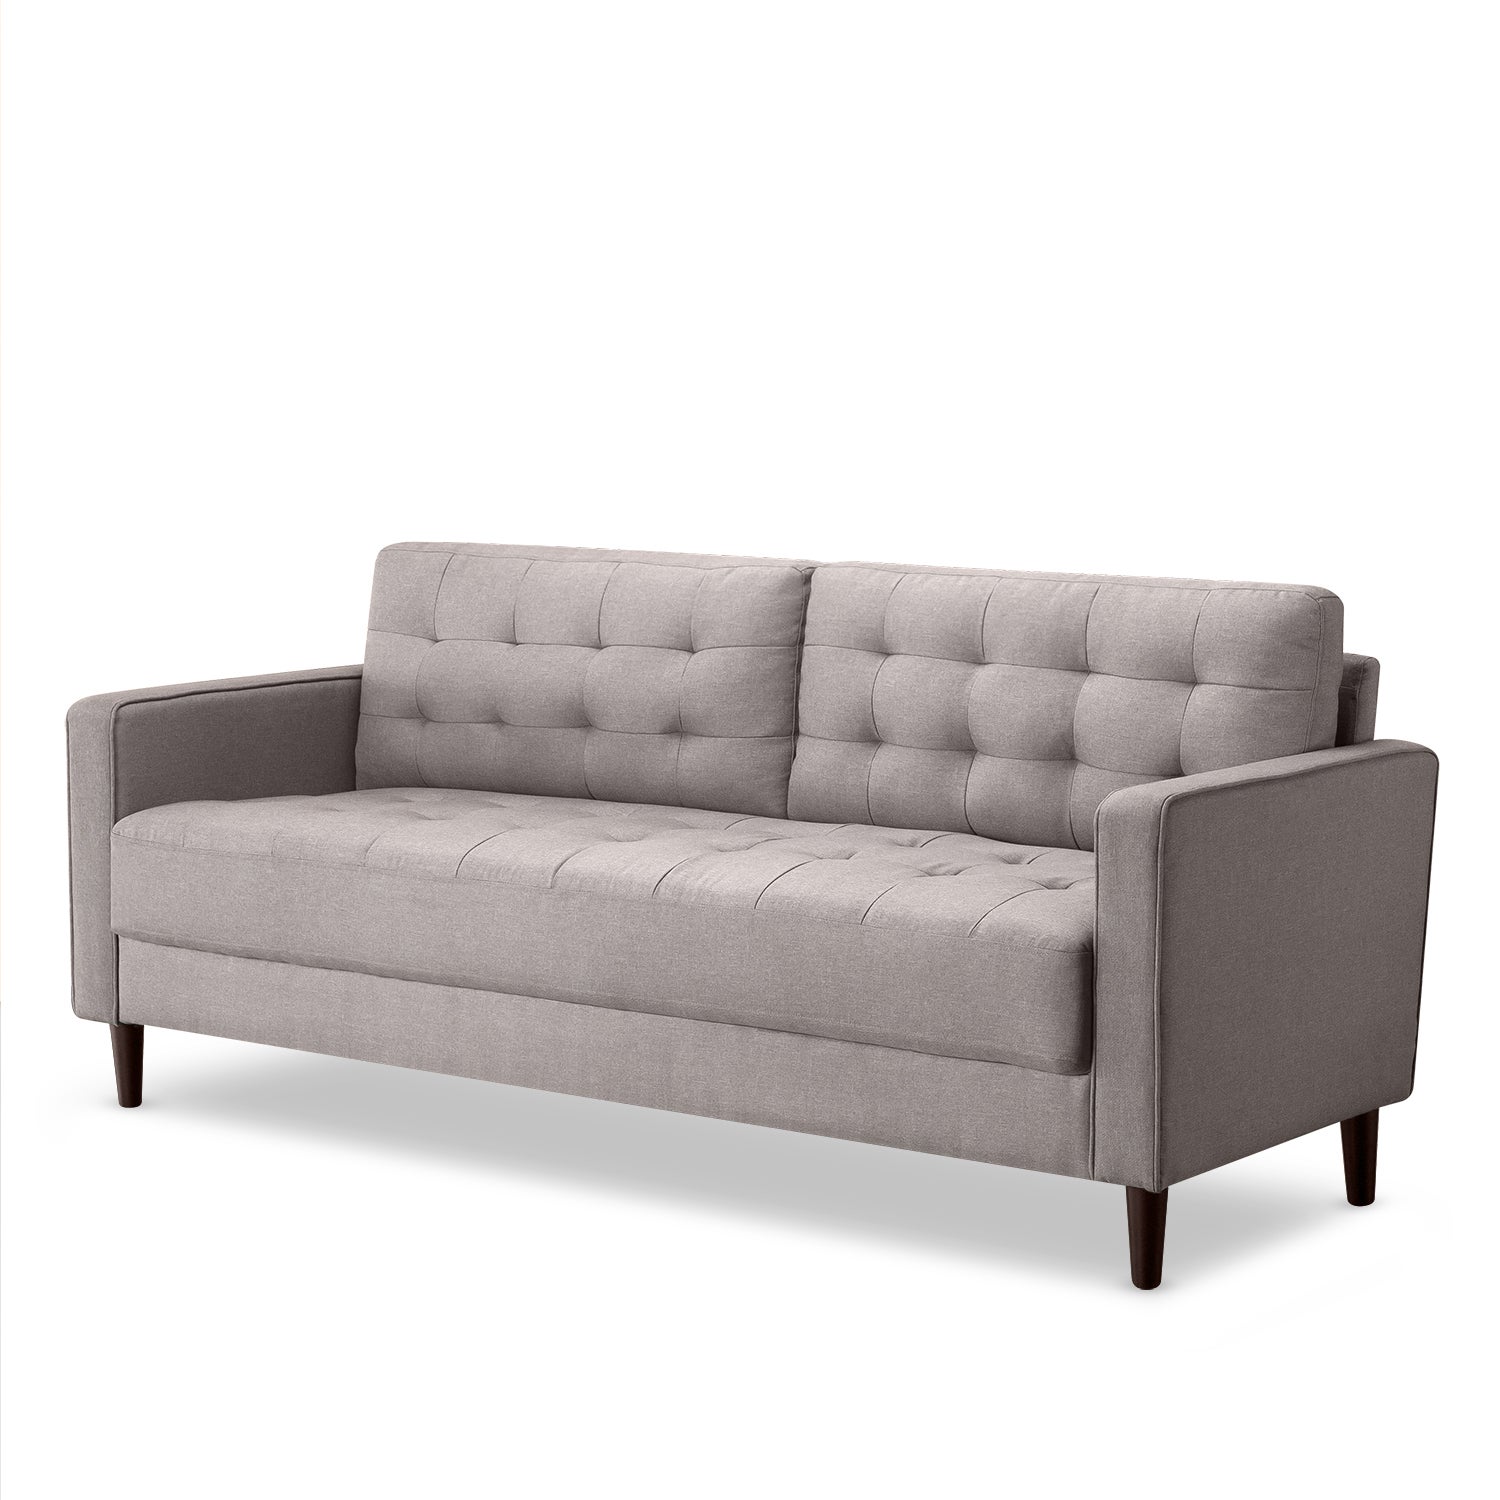 Zinus Lux 3 Seater Sofa Couch - Stone Grey